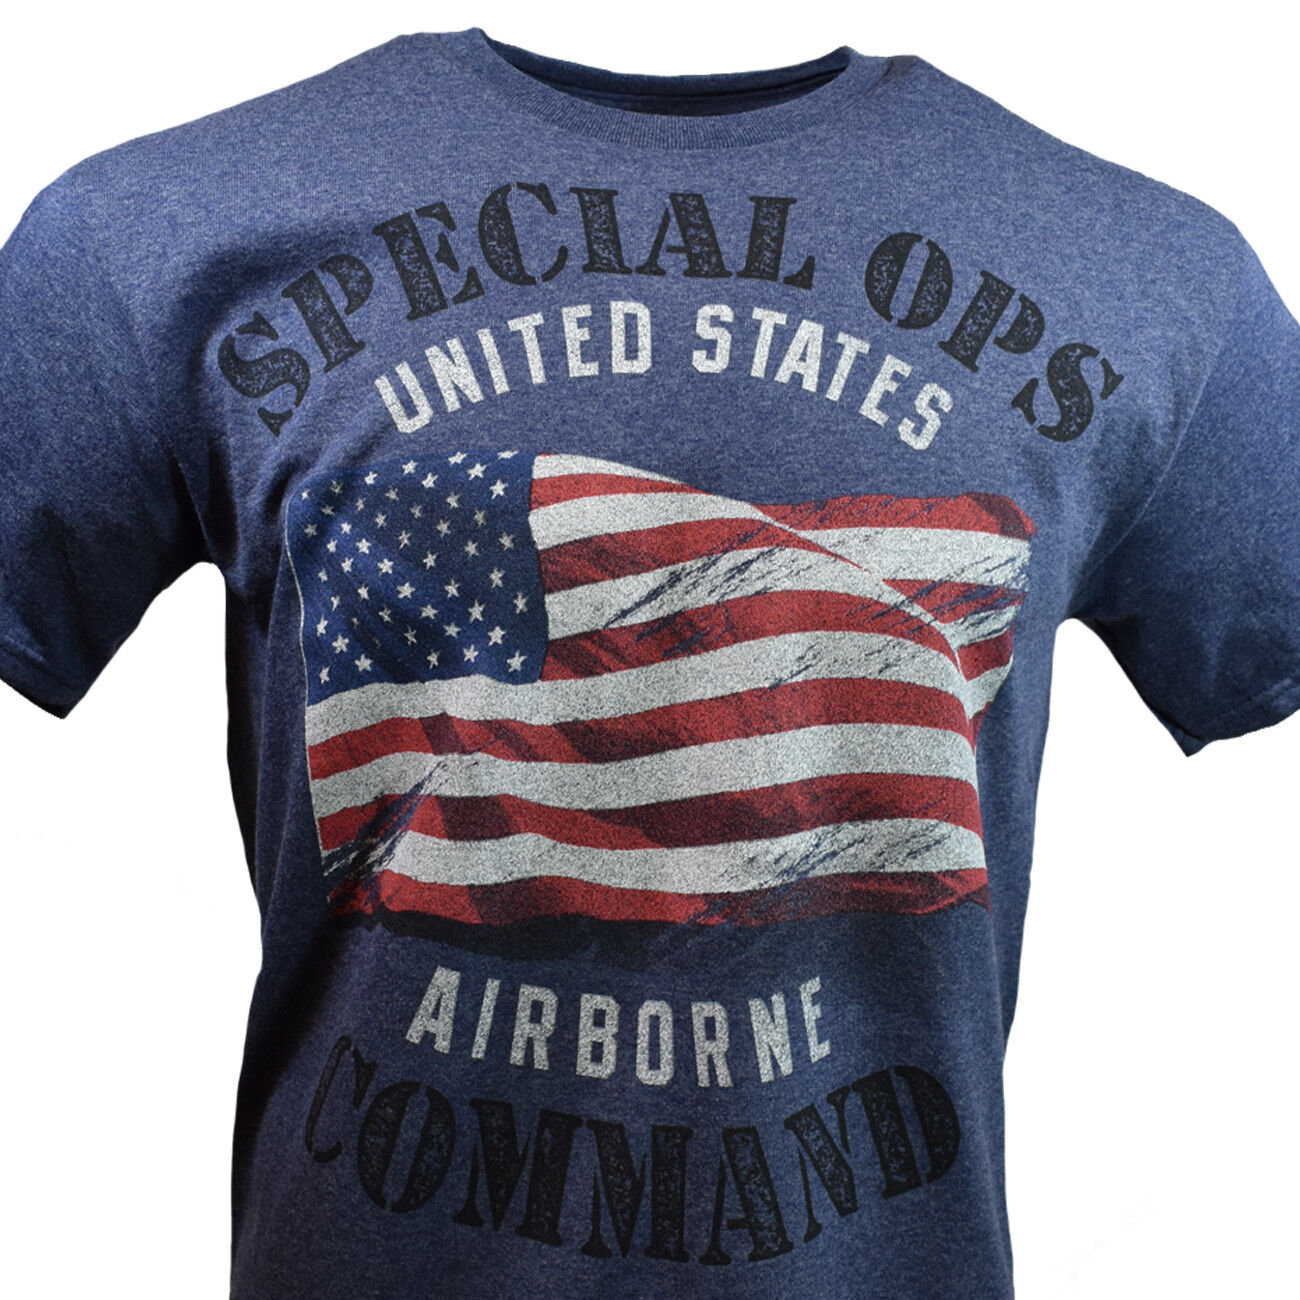 Special Ops Command United States Airborne T-Shirt - Mens/Unisex